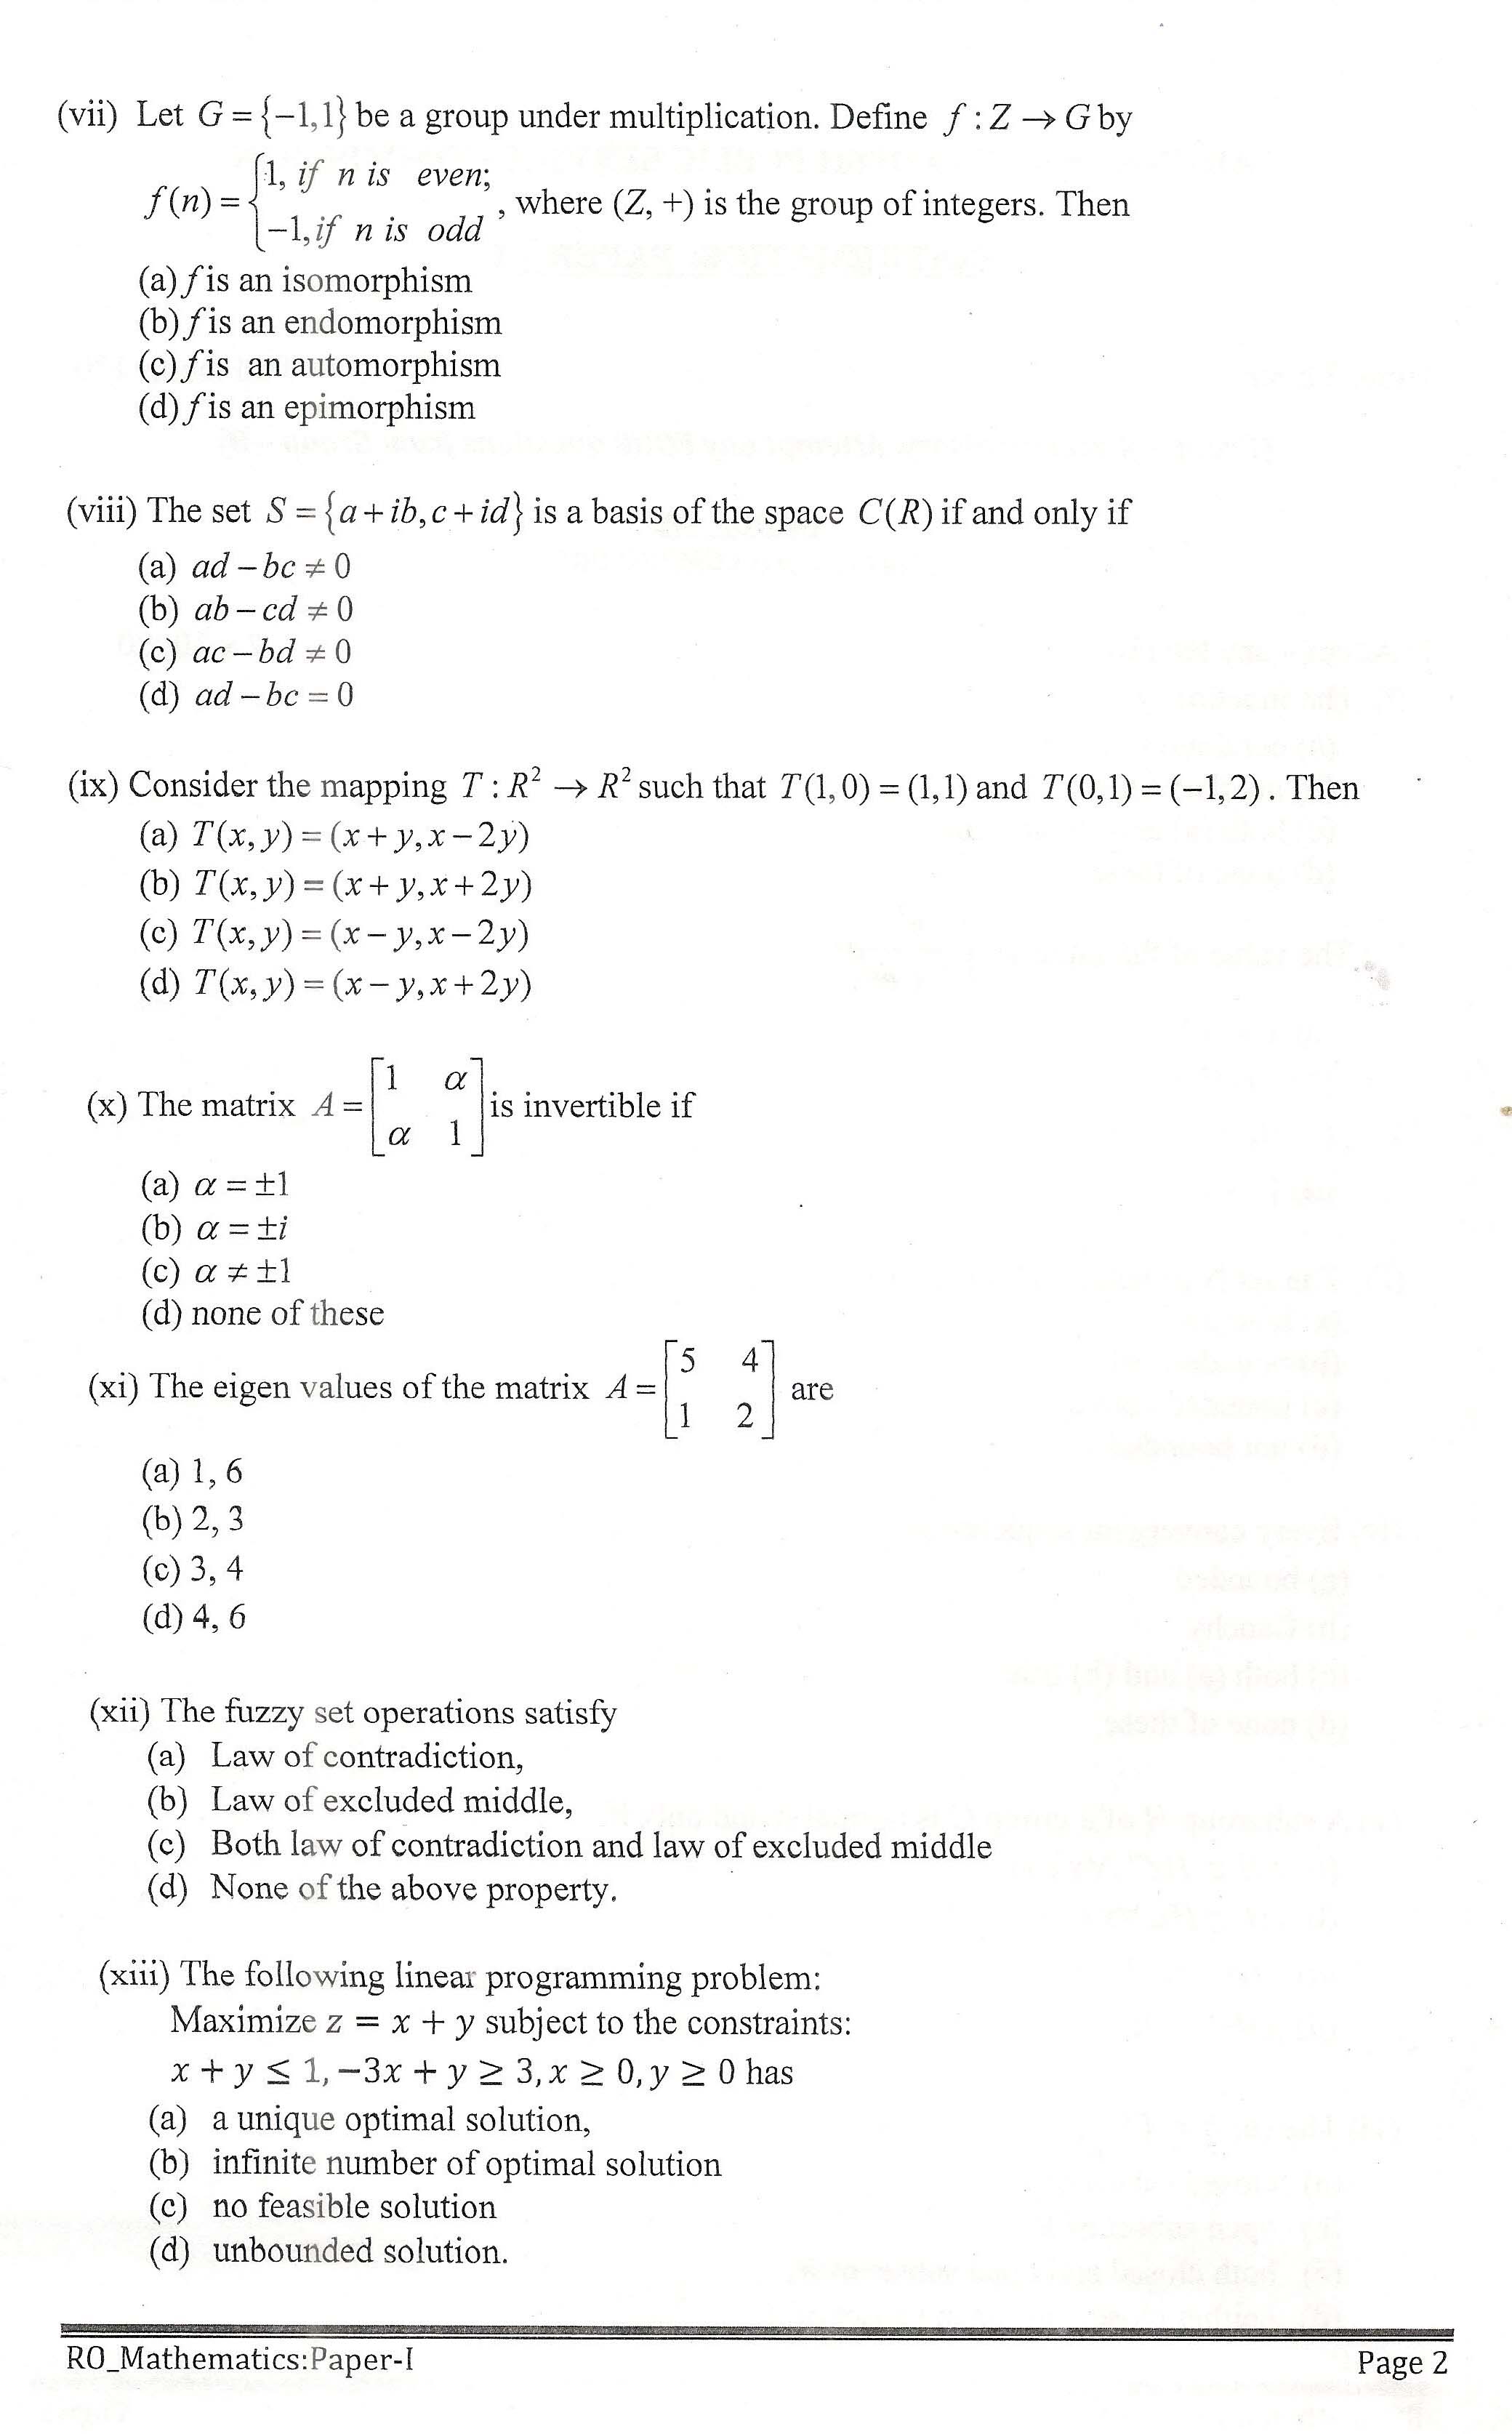 APPSC Research Officer Mathematics Paper I Exam Question Paper 2014 2